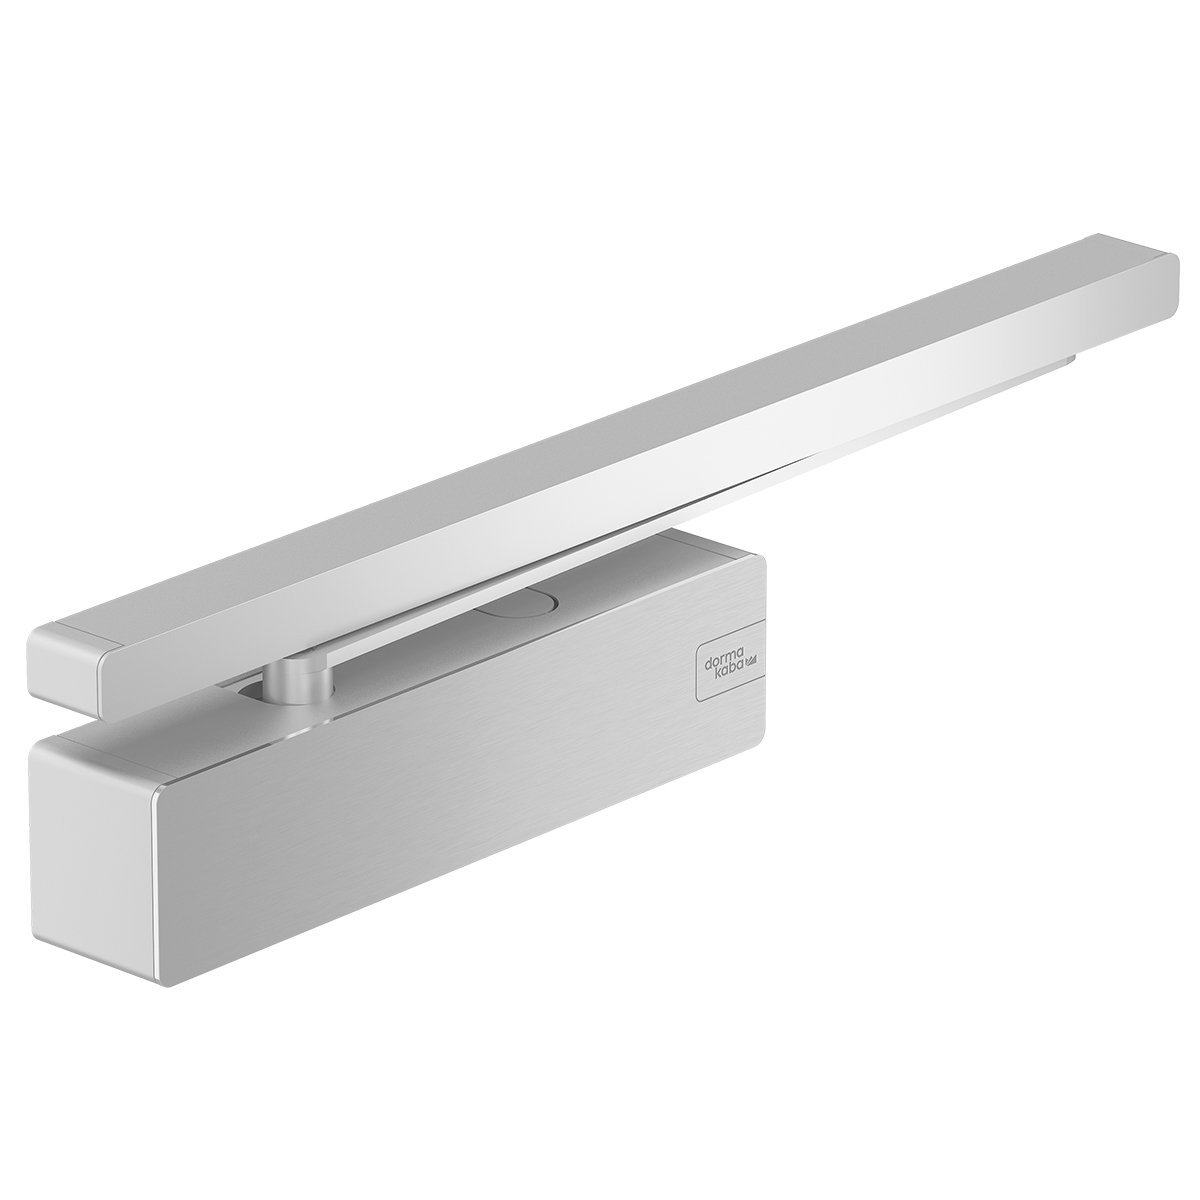 This is an image of the DORMA TS 92 door closer with slide channel.